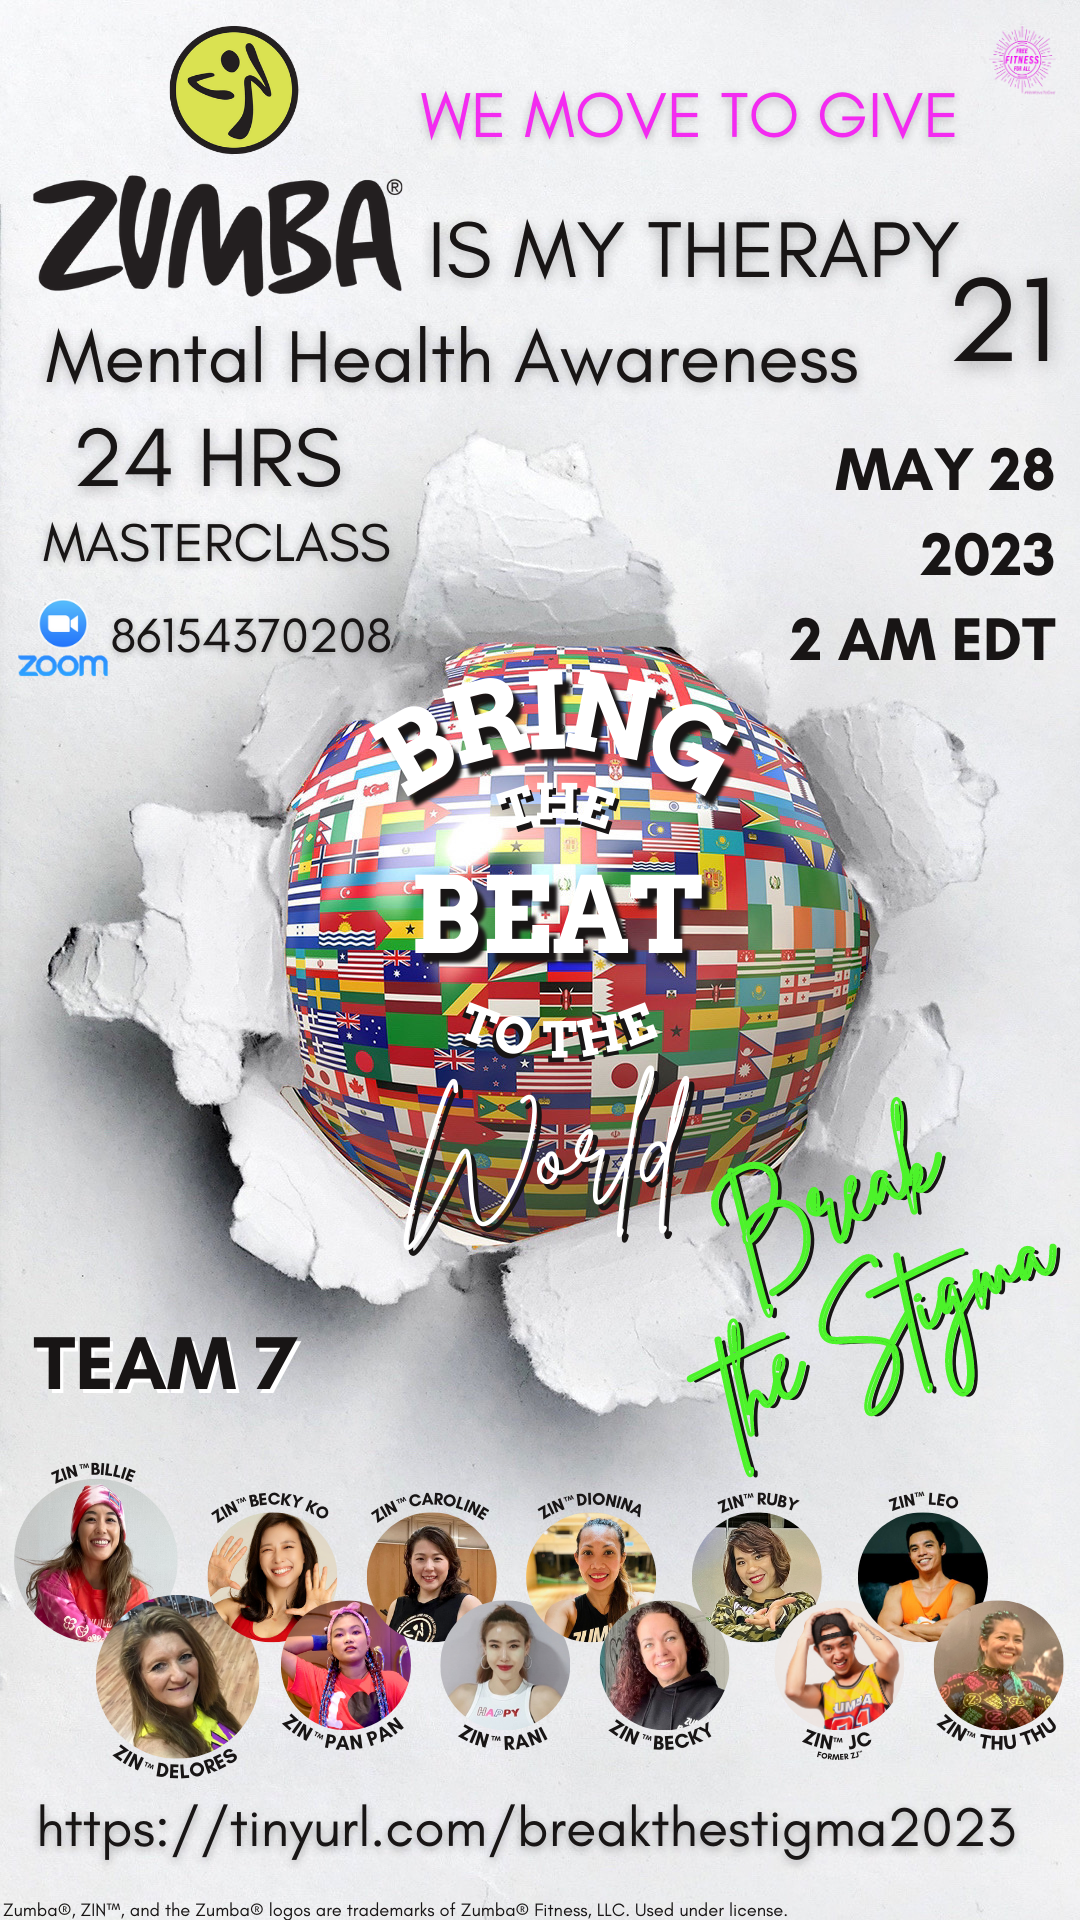 Team 7 - May 28th 2 AM EDT